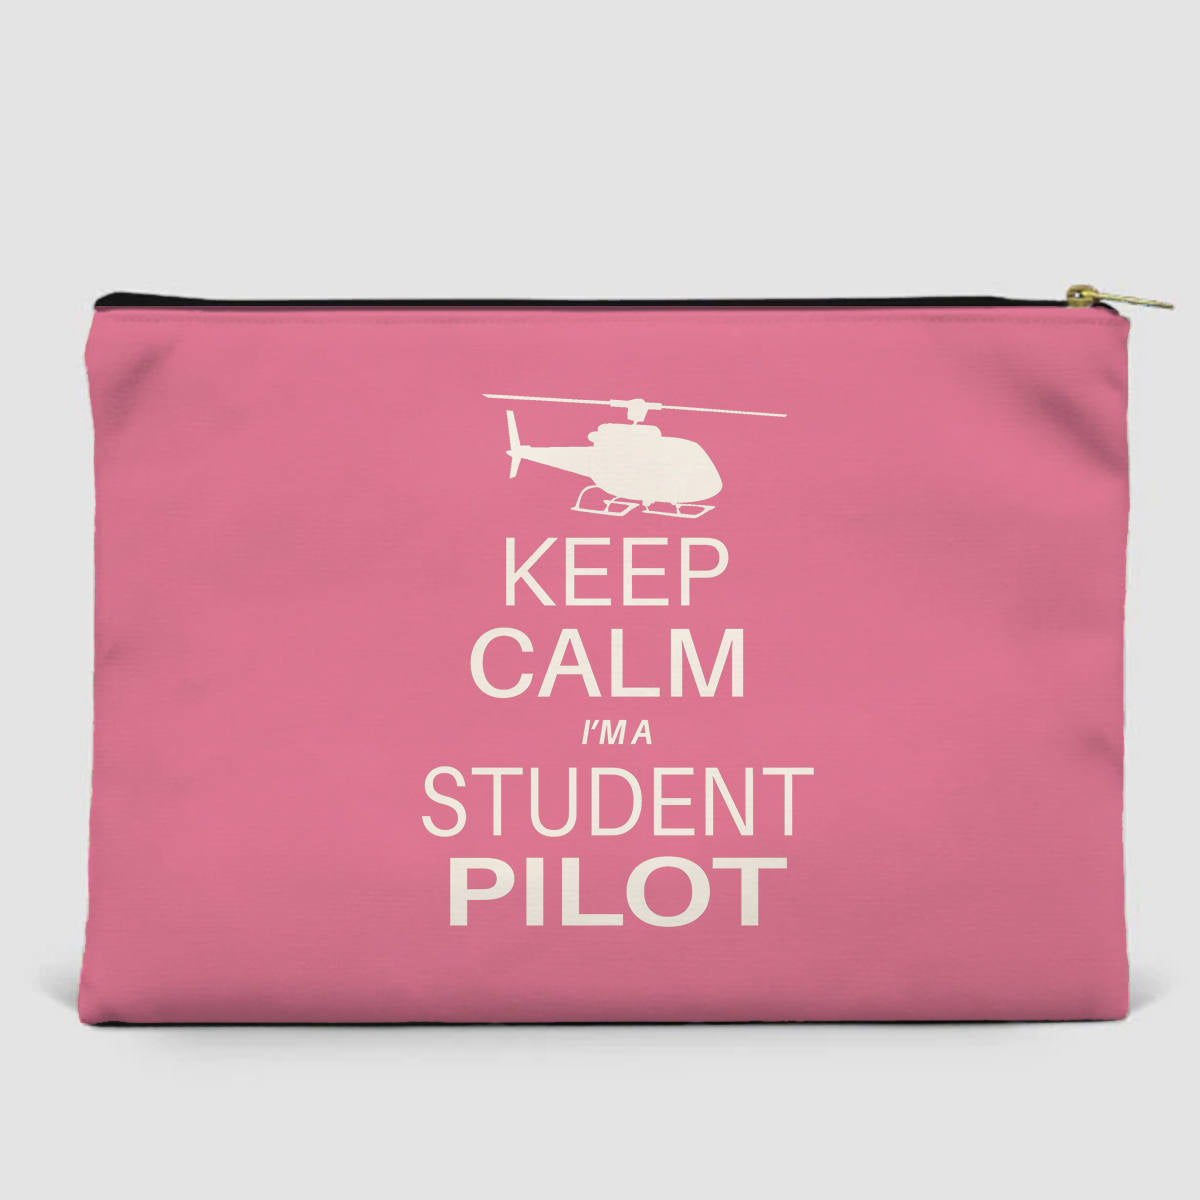 Student Pilot (Helicopter) Designed Zipper Pouch